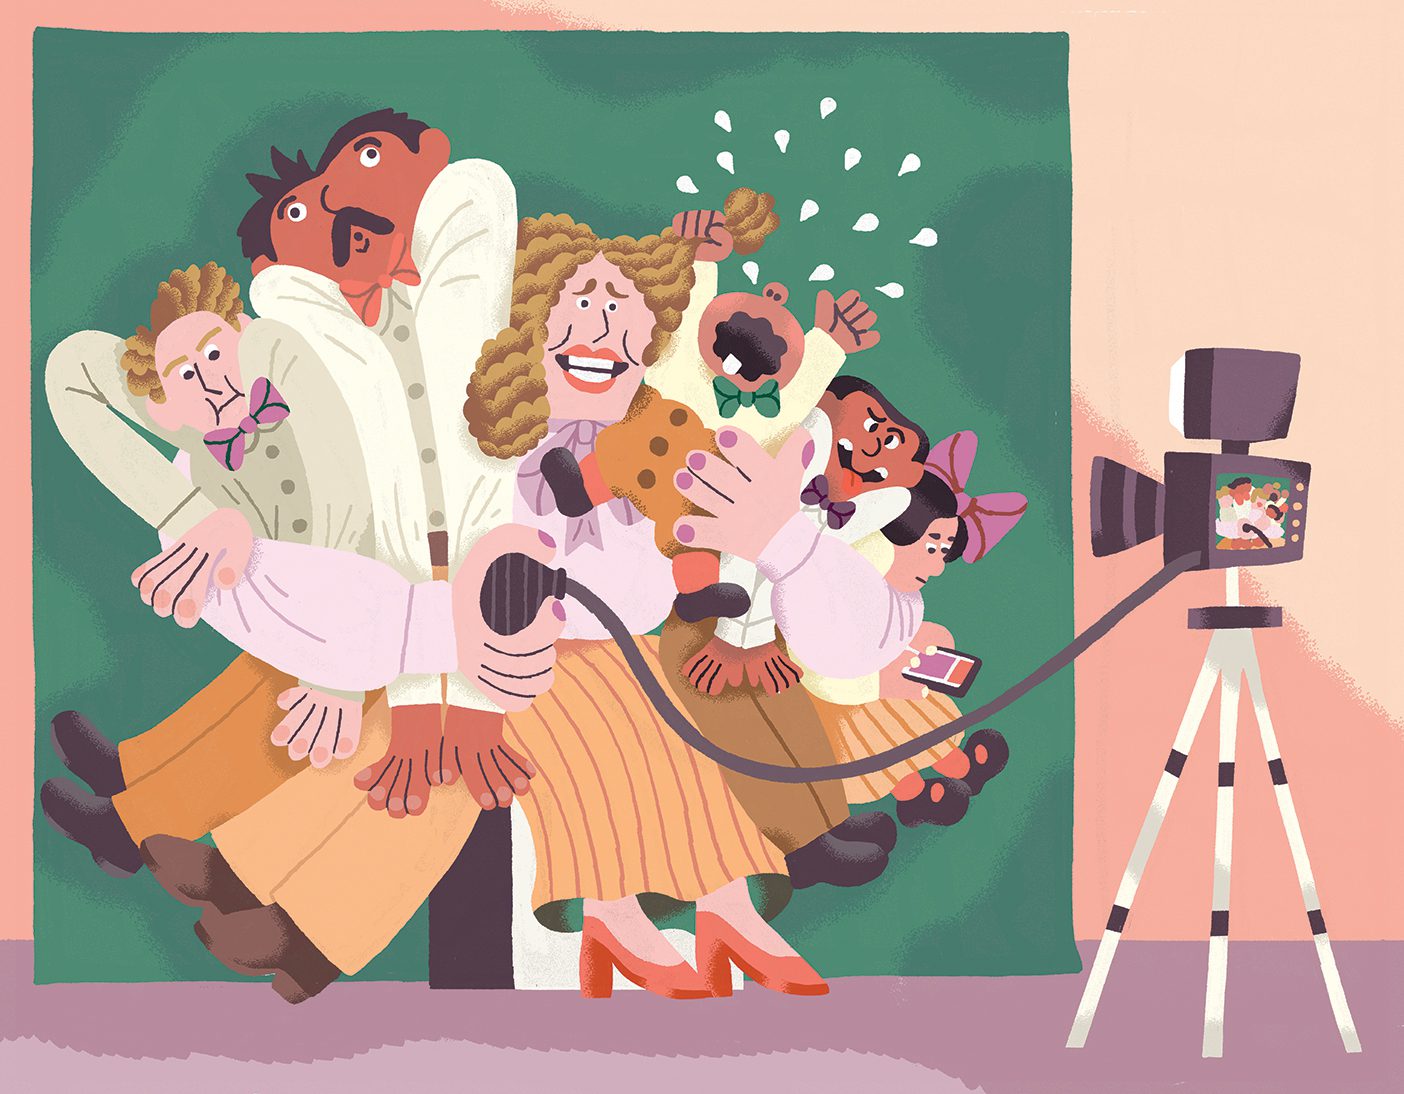 In this whimsical illustration, a distracted family smooshes in to take a family photo.